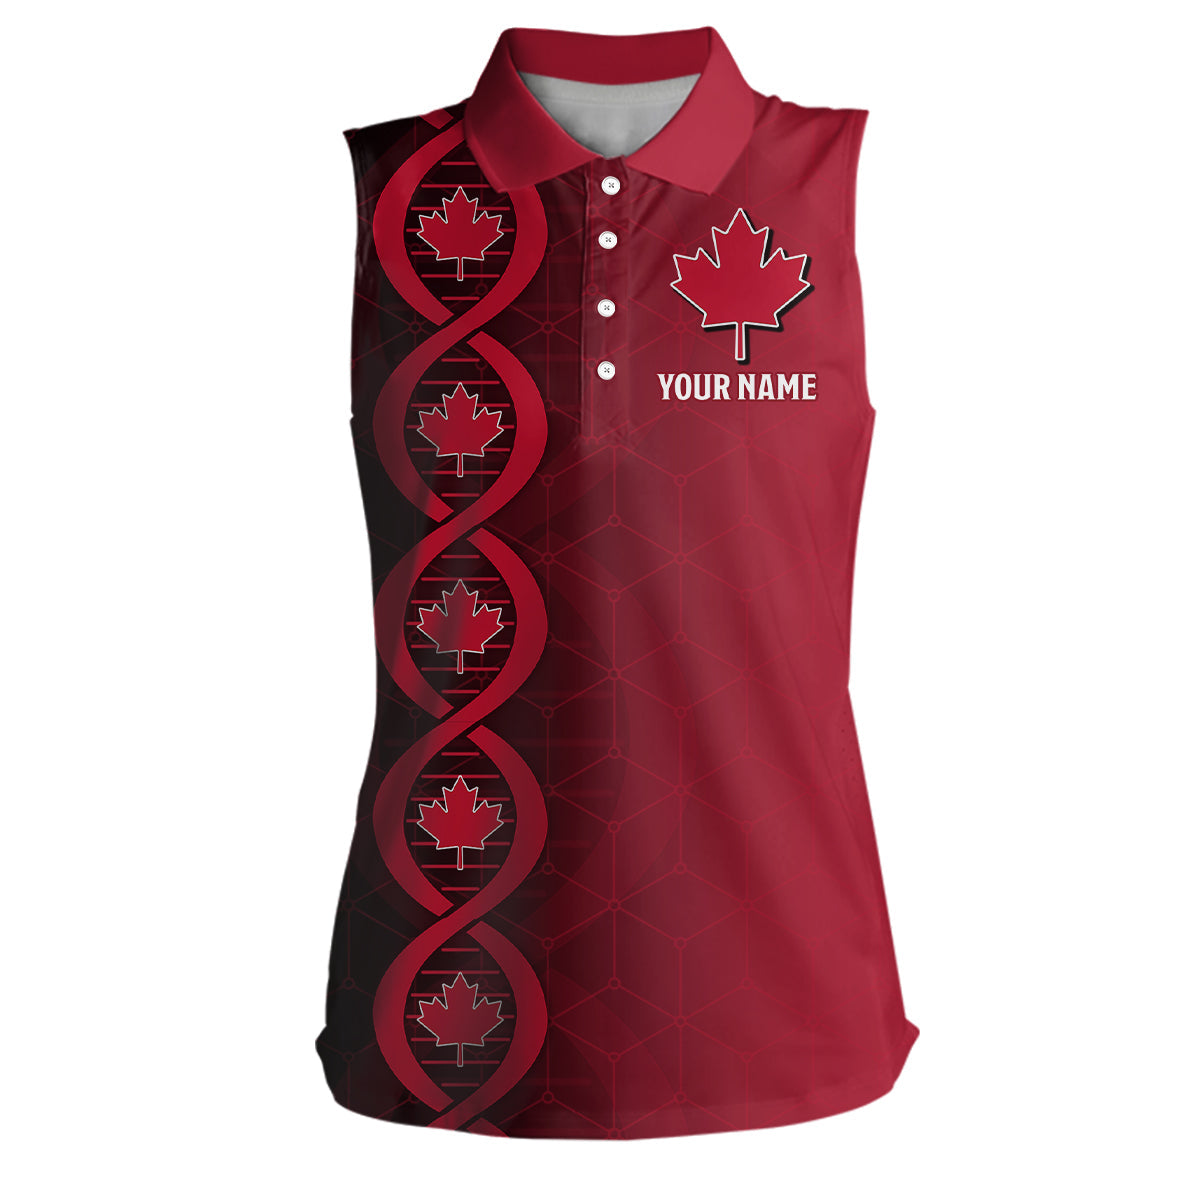 Womens Sleeveless Polo Shirt DNA Canada 1st July Red Maple Leave Custom Patriotic Golf Tops For Women LDT0999